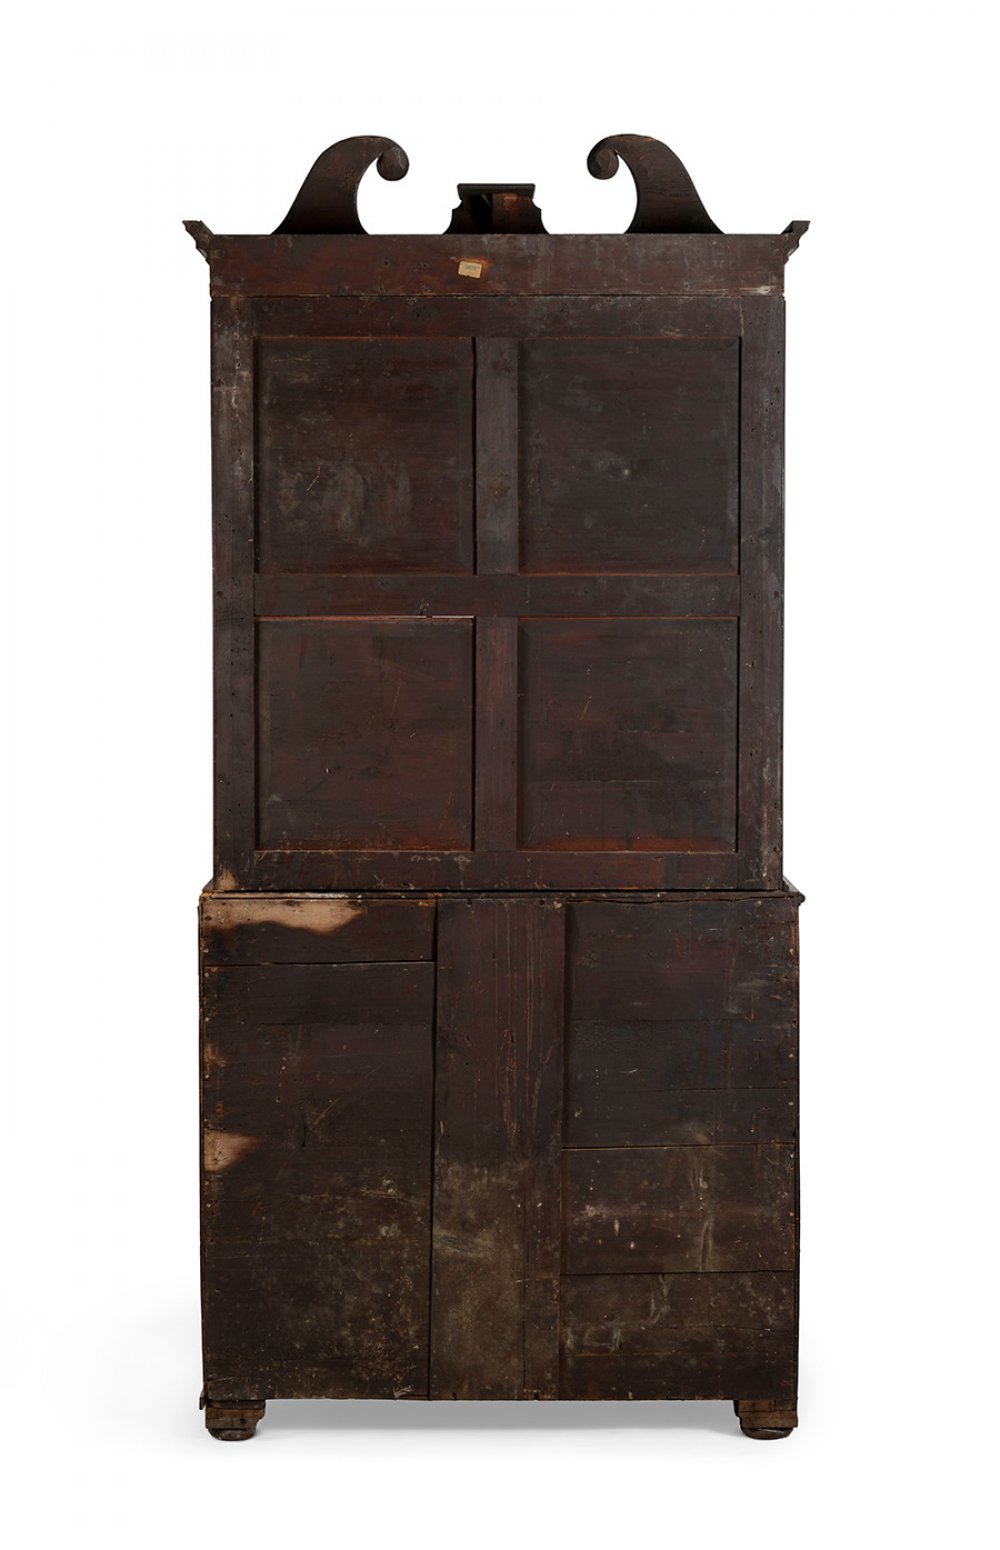 Georgian period desk-bookcase. England, late 18th-early 19th century.Mahogany wood and lemongrass - Image 4 of 7